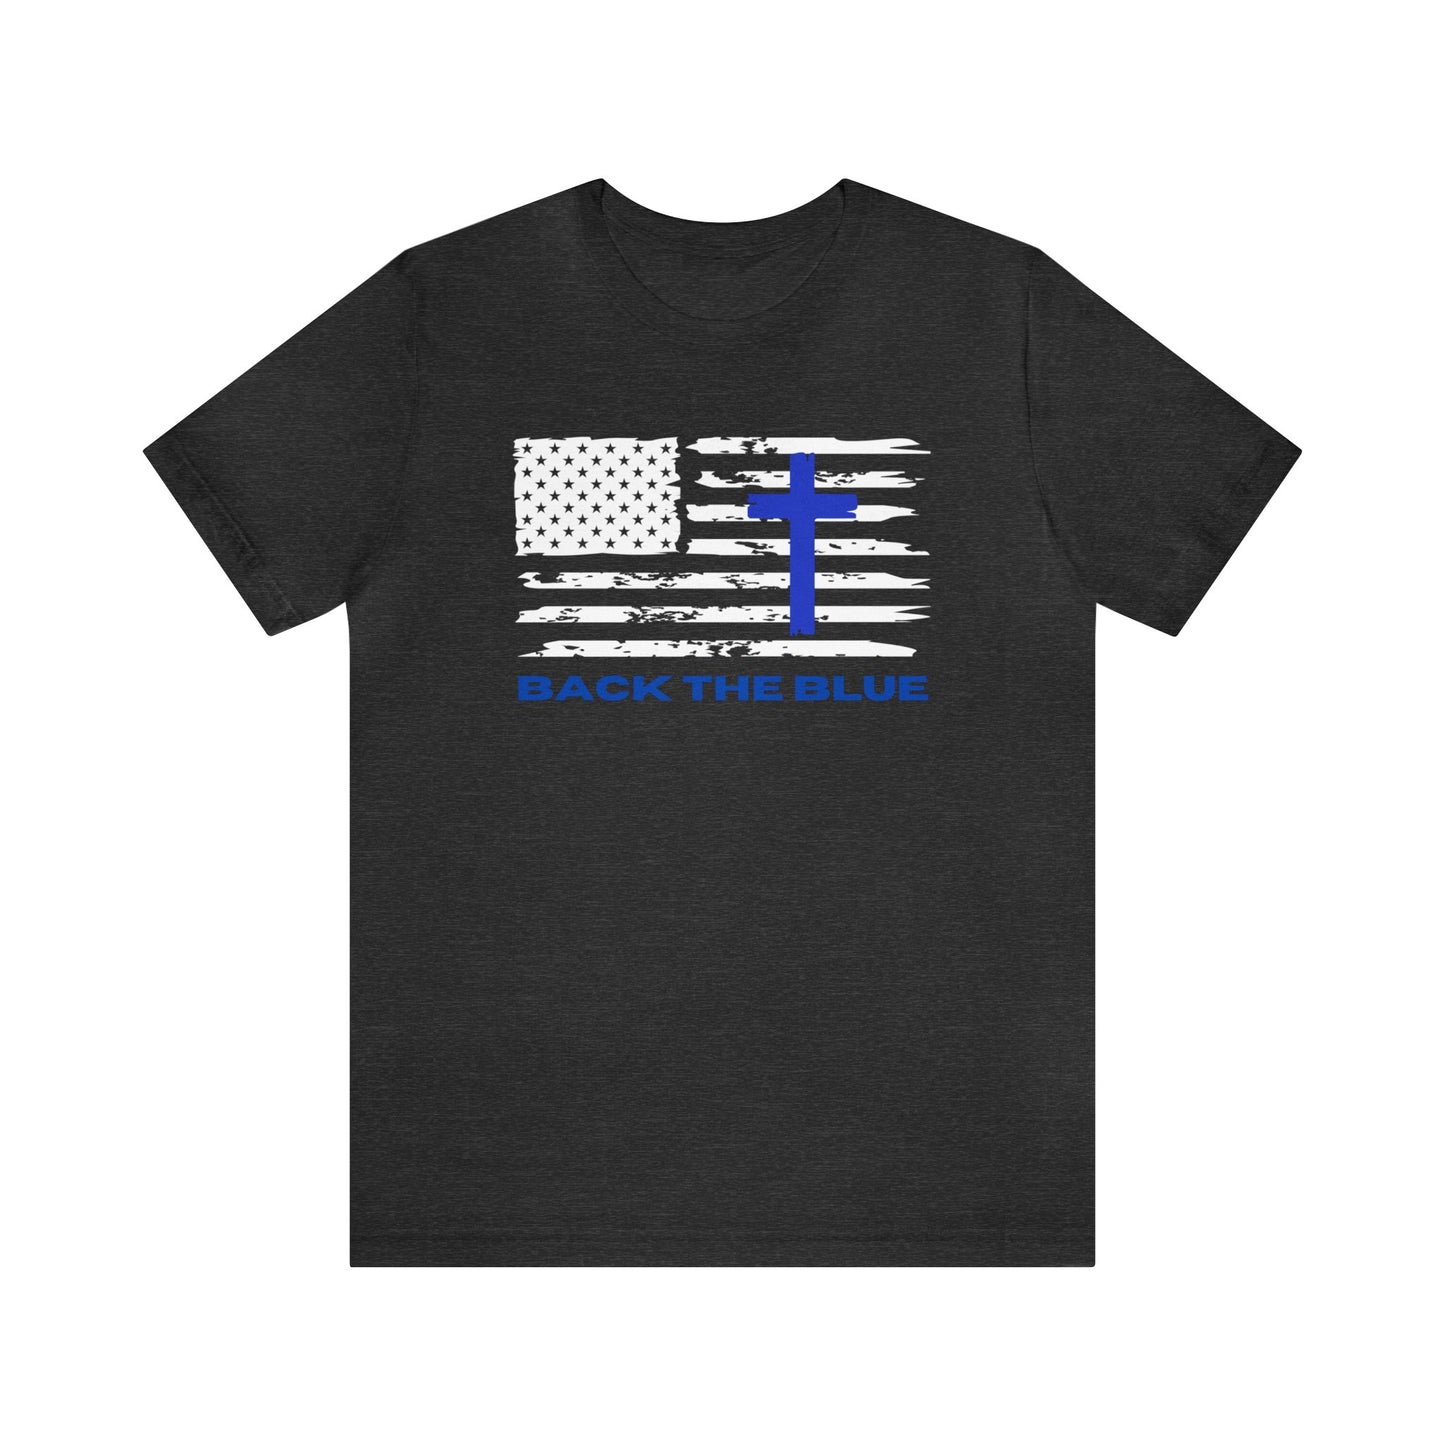 American Flag Back the Blue with Cross Shirt, Back the Blue Shirt with Cross, Patriotic Shirt with Cross, Back the Blue Patriotic Shirt, Catholic Back the Blue Shirt